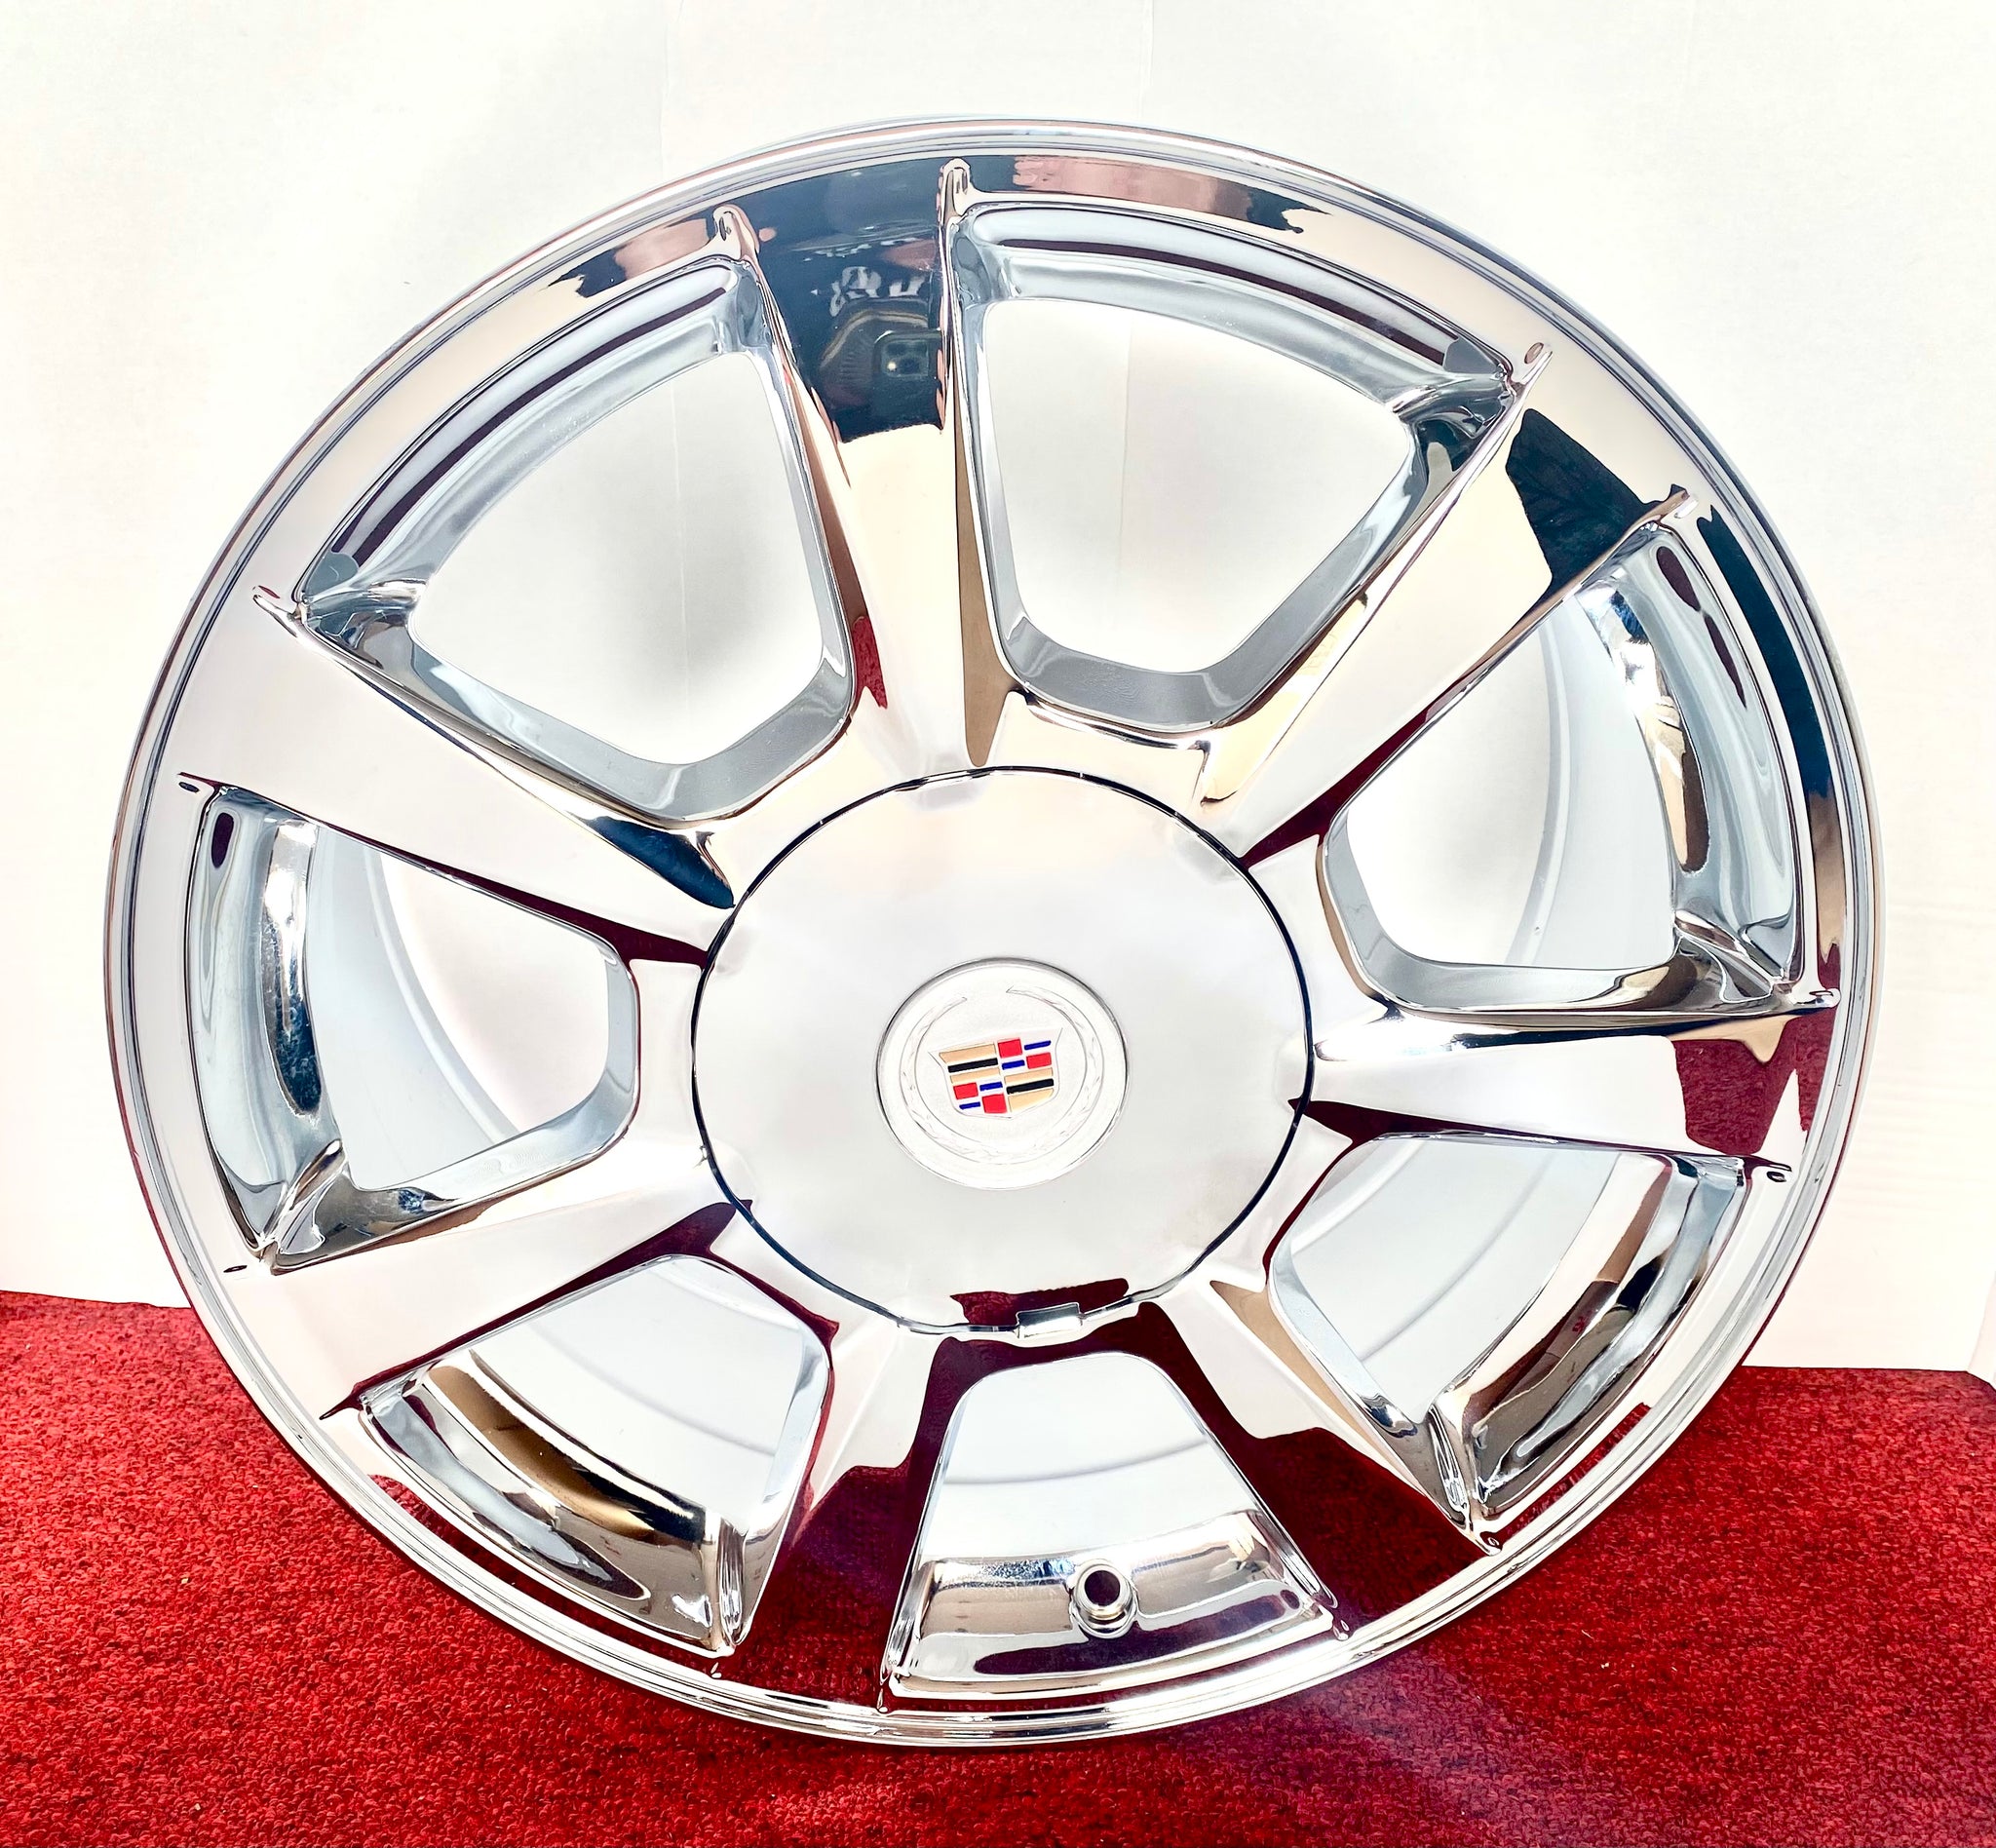 CTS 17" CHROME GENUINE FACTORY GM SET OF 4 WHEELS 2008-2013 4623